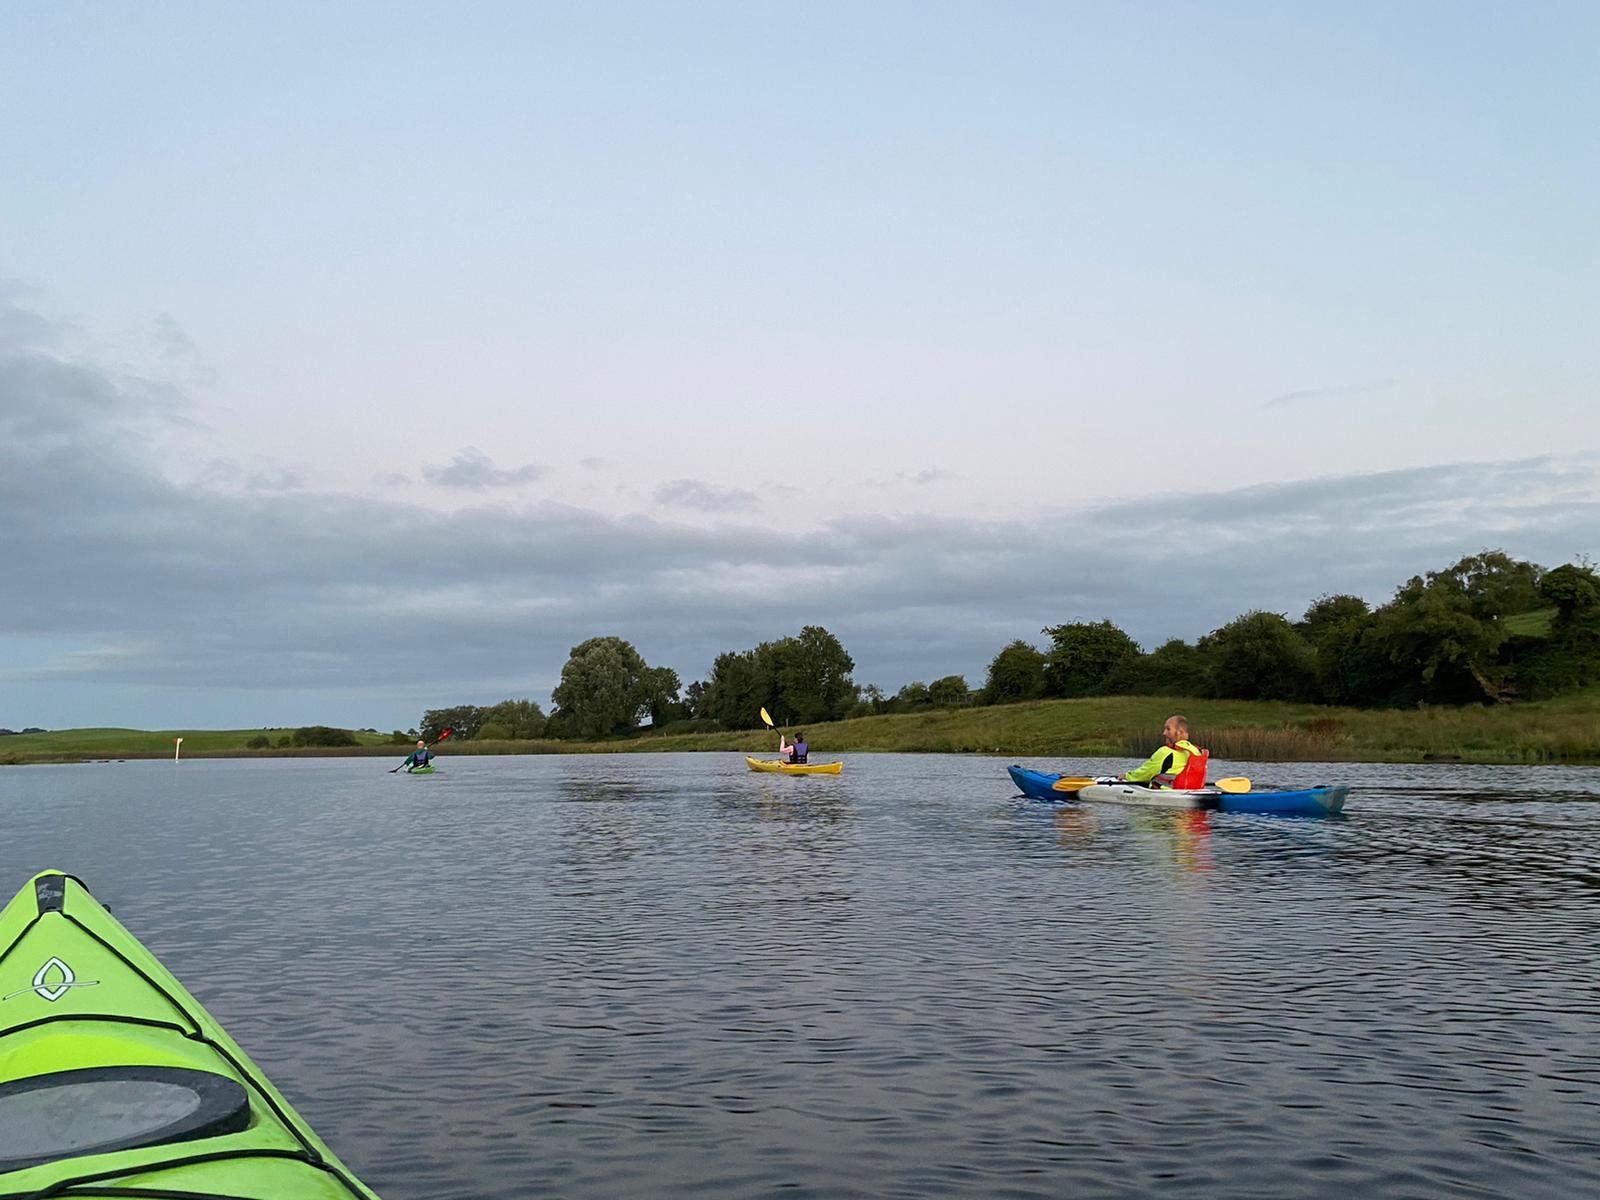 Paddling on Lough Erne with Blue Green Yonder as part of Festival Lough Erne.